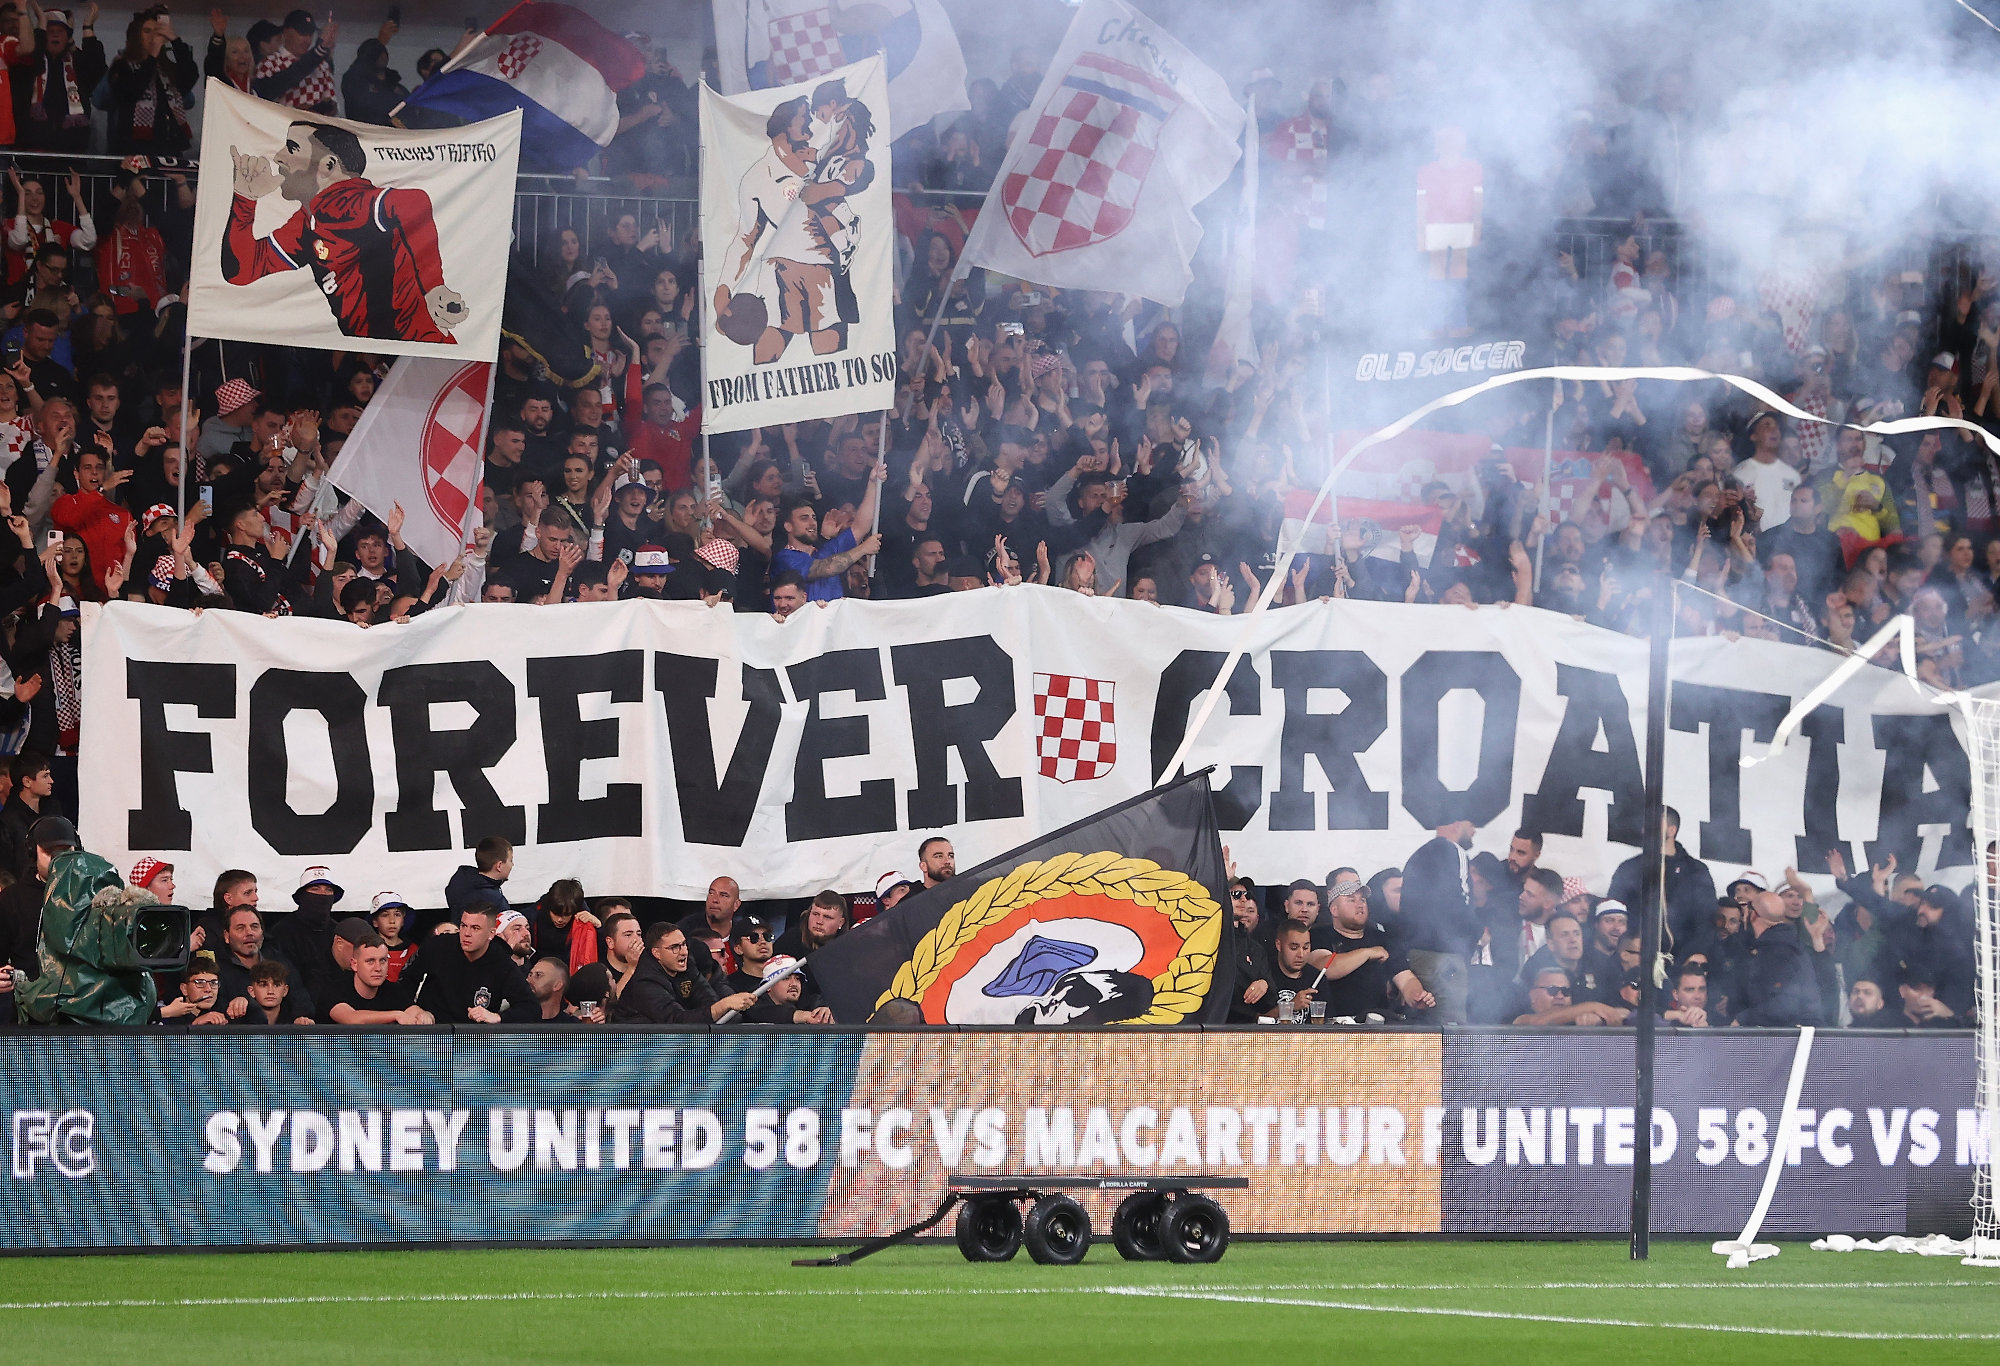 Sydney United fans during the Australia Cup Final.